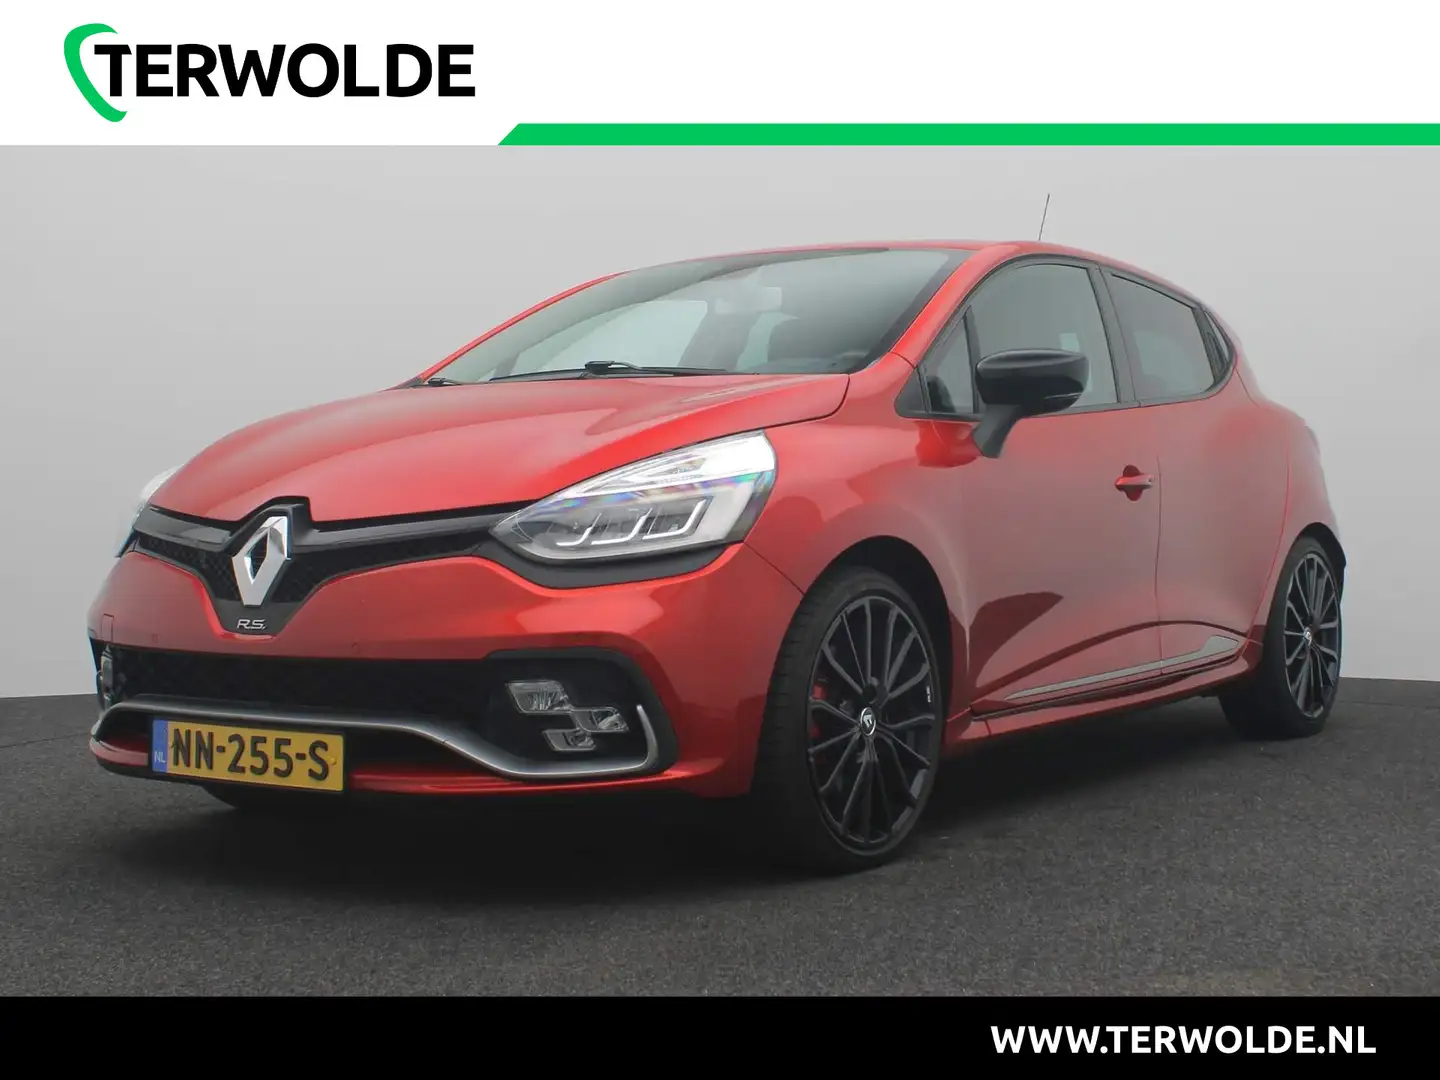 Renault Clio 1.6 Turbo 200 R.S. | CUP Chassis | BOSE-audio | Or Rosso - 1